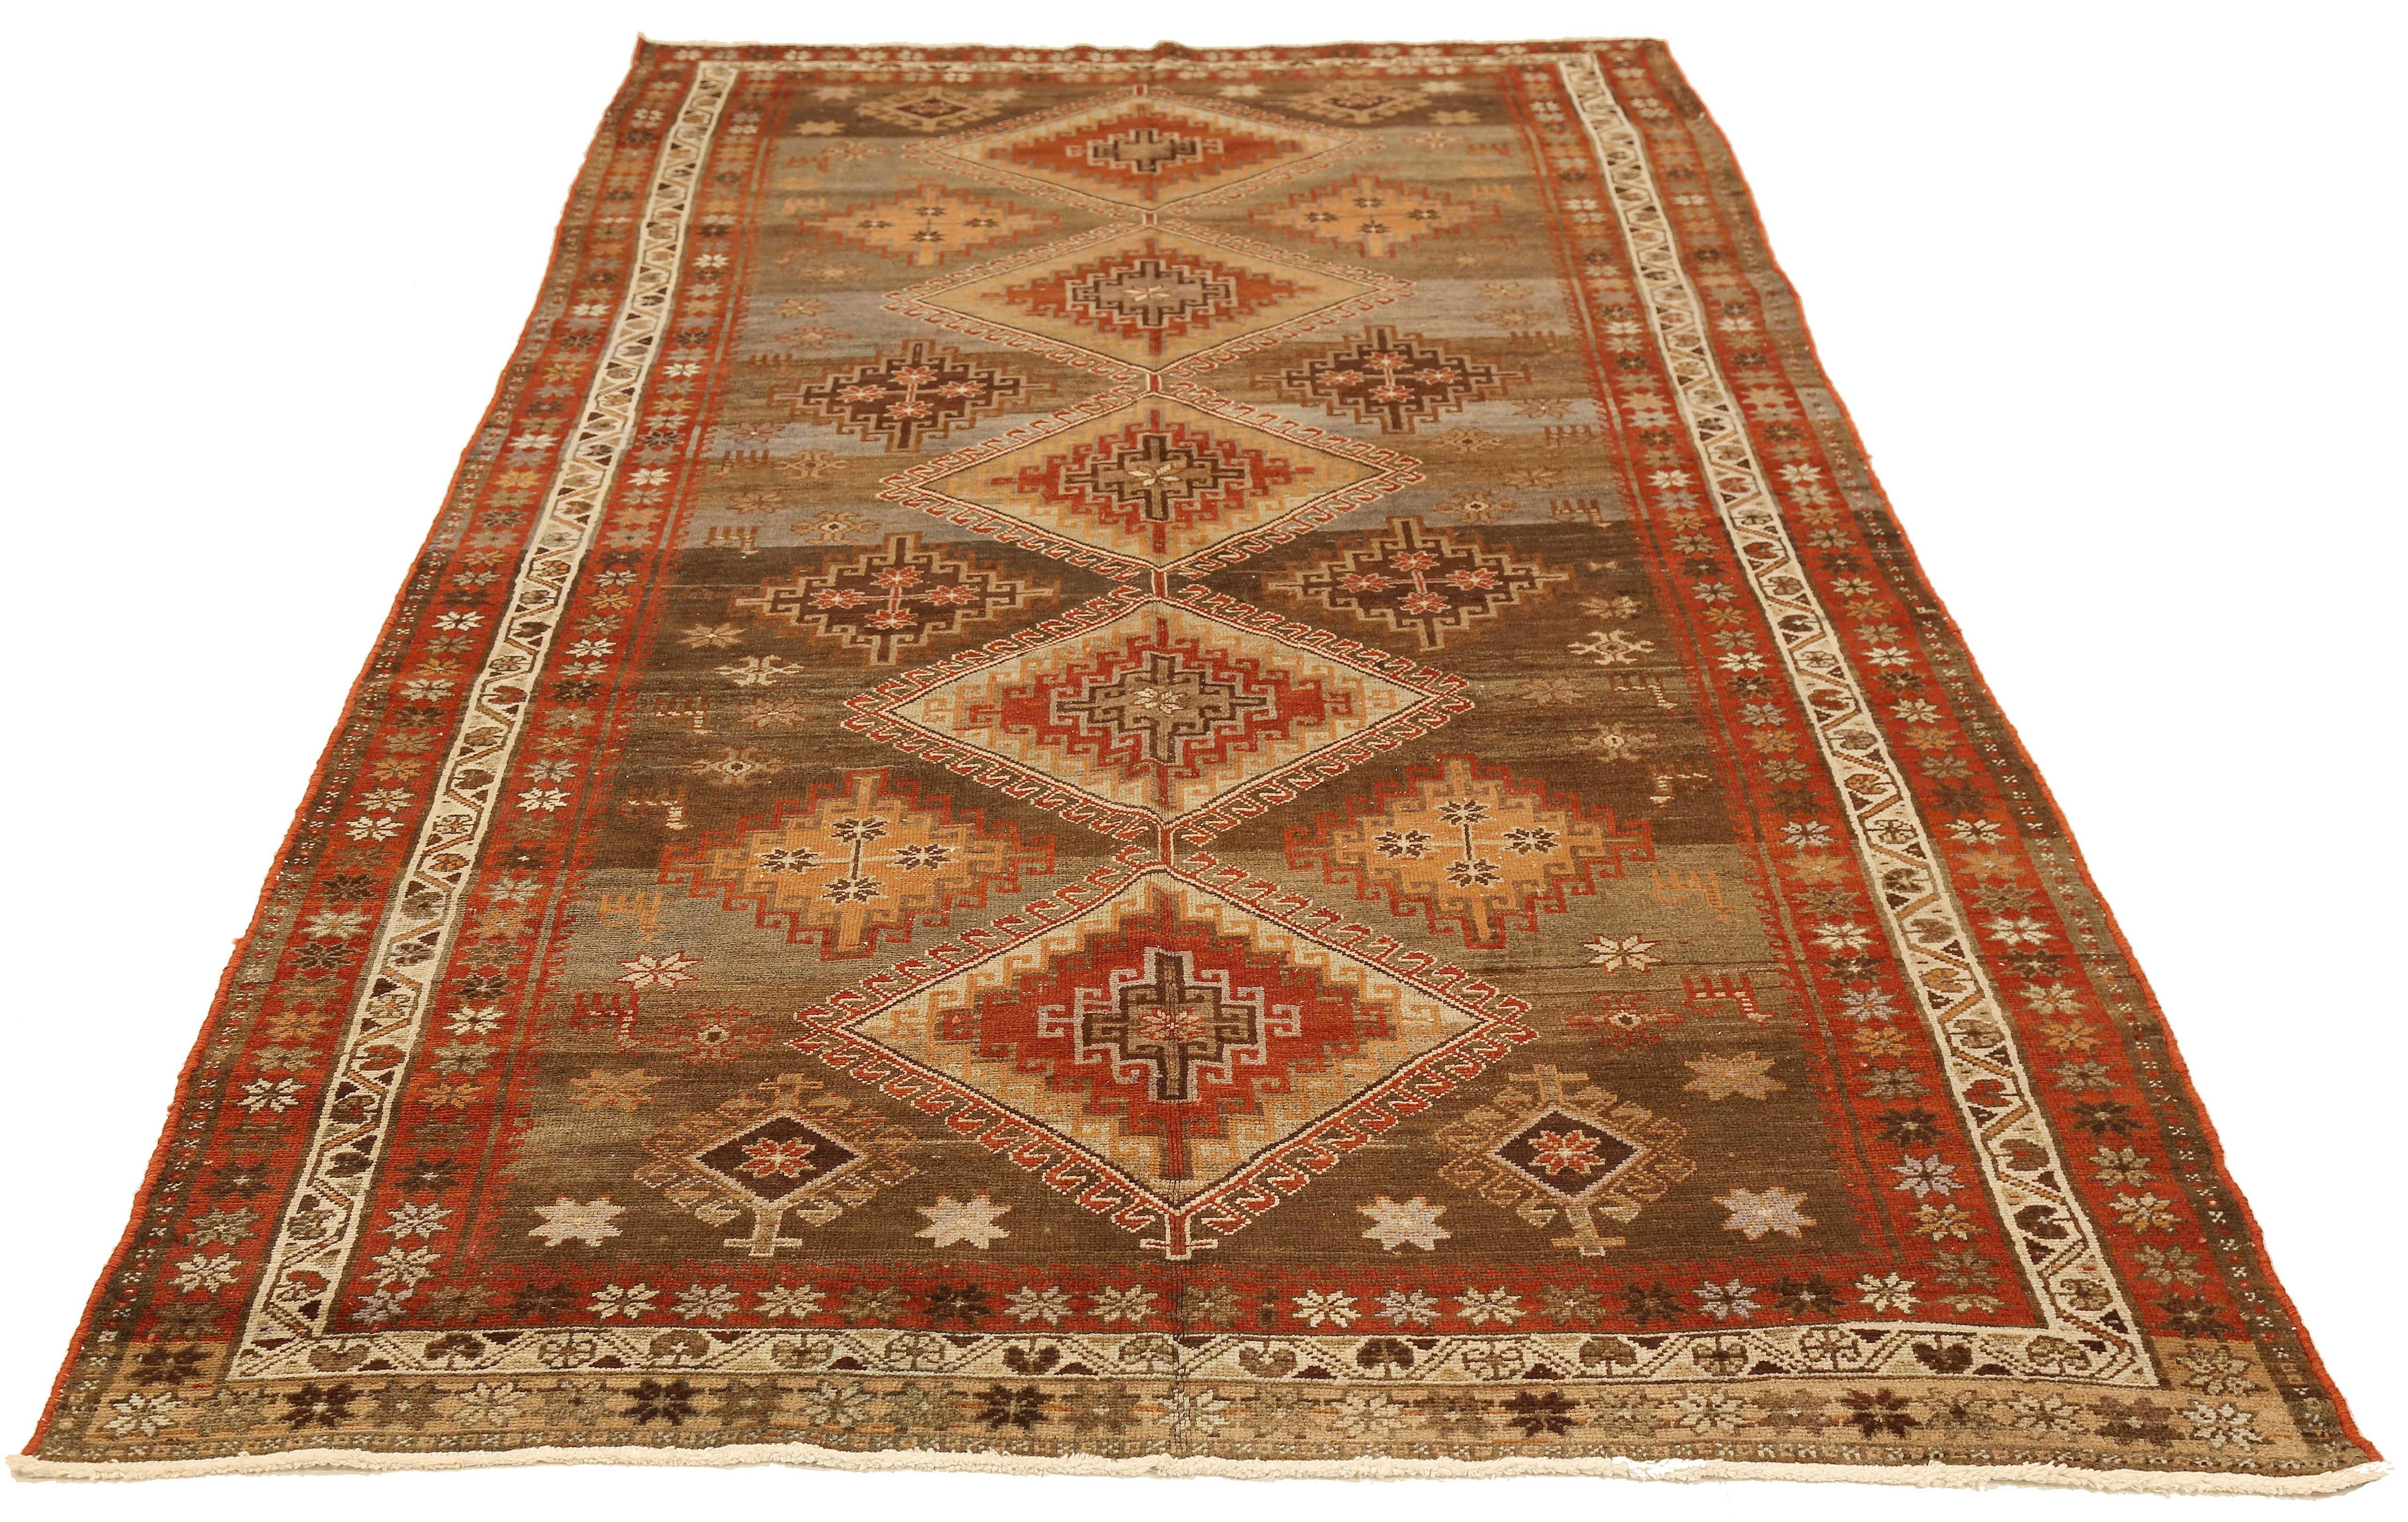 Antique Persian rug handwoven from the finest sheep’s wool and colored with all-natural vegetable dyes that are safe for humans and pets. It’s a traditional Hamedan design featuring tribal patterns in red, brown and beige. The details are often